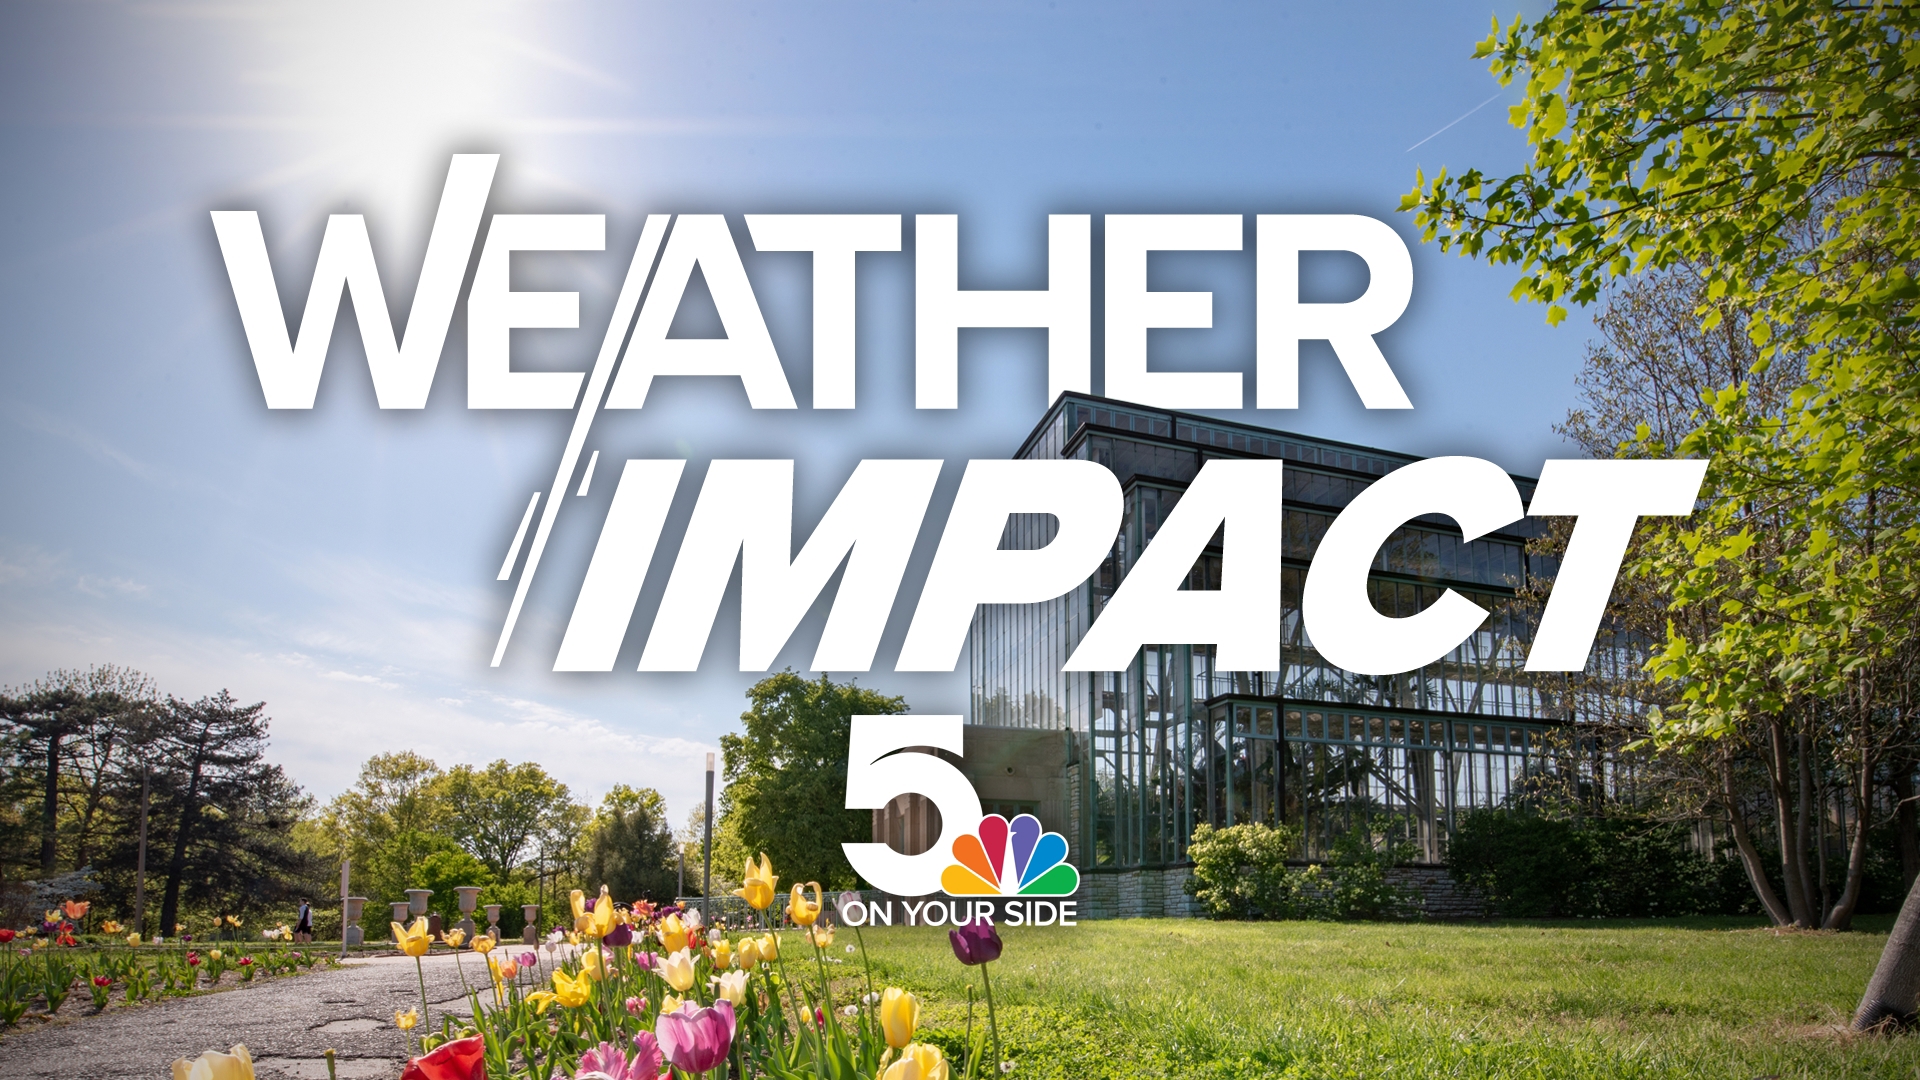 5 On Your Side meteorologists use Weather Impact Alerts to let you know when impactful or dangerous weather is expected.